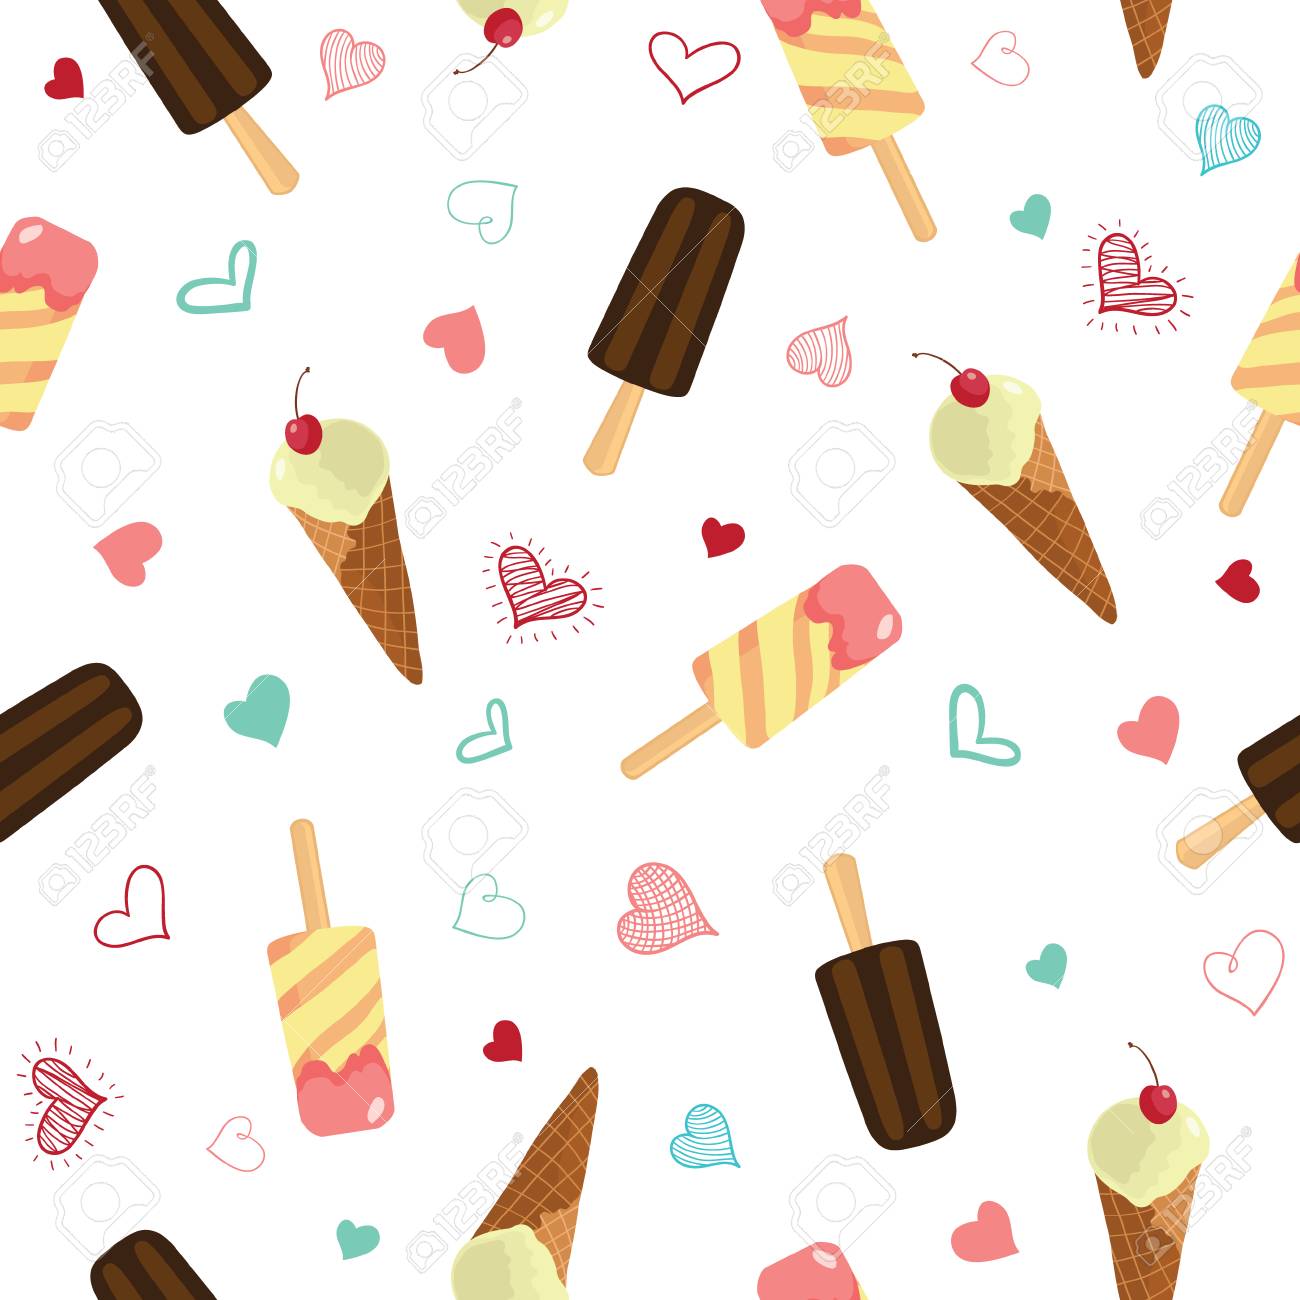 Cute Ice Cream And Hearts Seamless Pattern Great For Yummy Summer